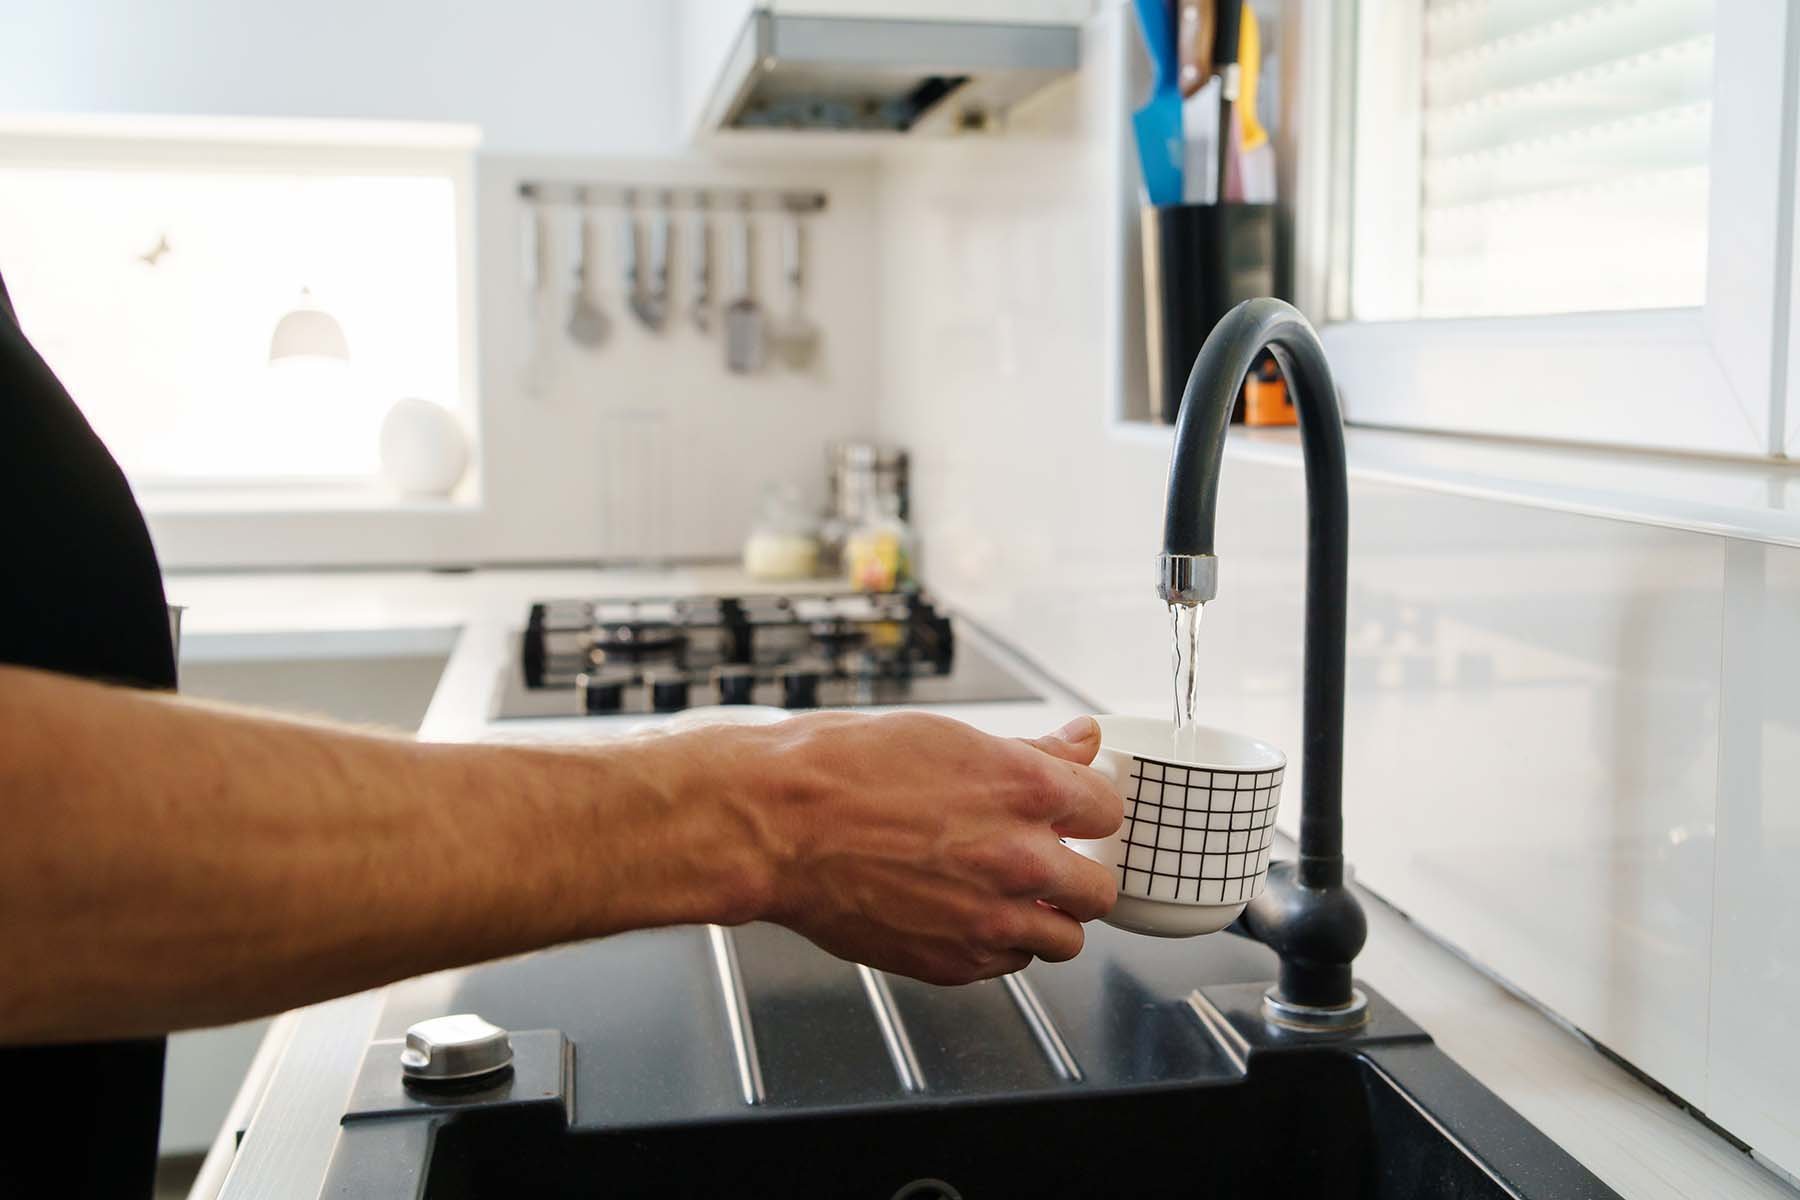 A person fills a patterned cup with water from a kitchen tap